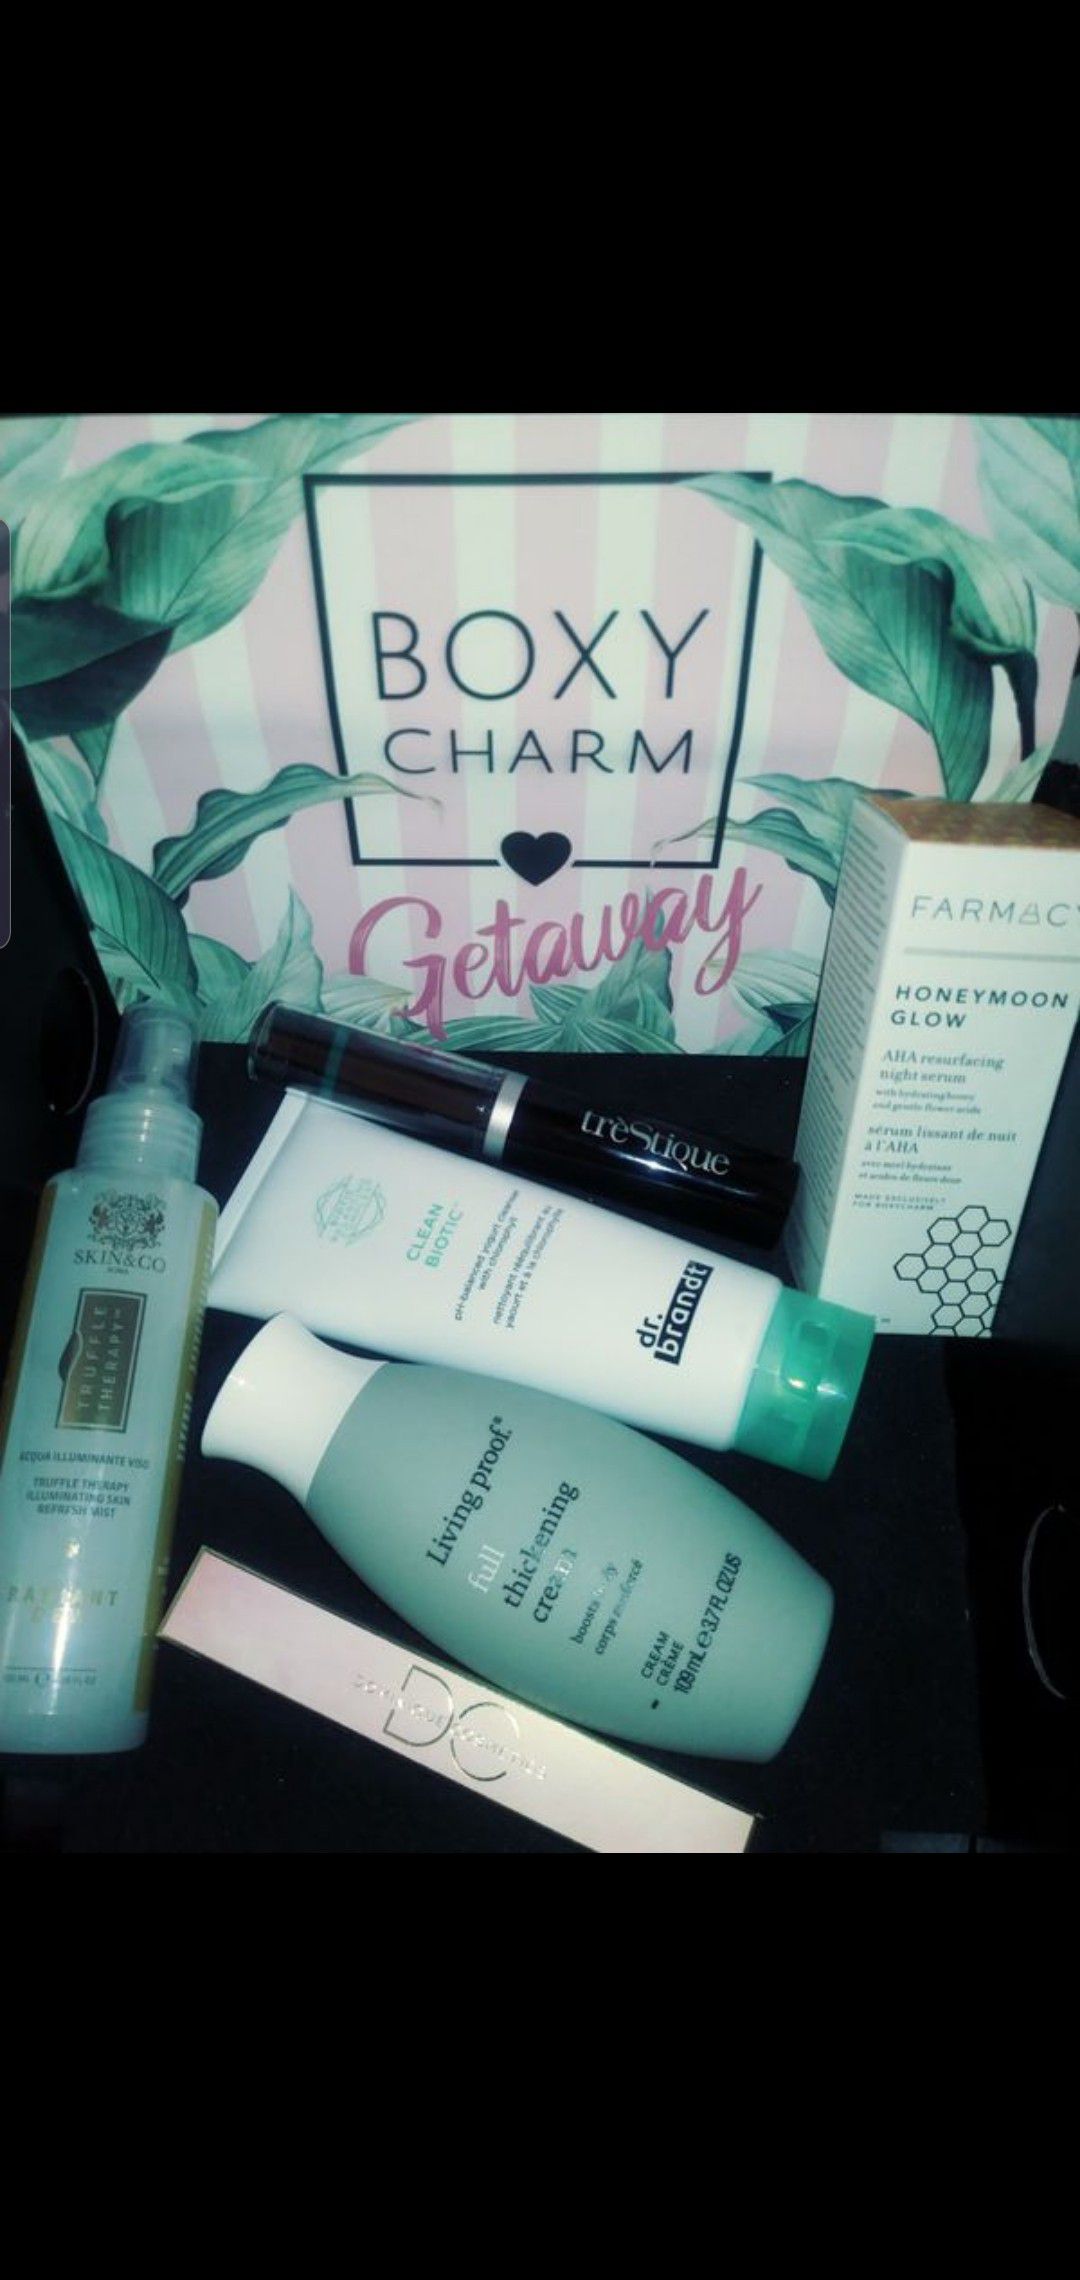 BoxyLuxe! BoxyCharm! Products! And more!!! Its NOT FREE! Ask for prices! Thank you. Rancho & Gowan